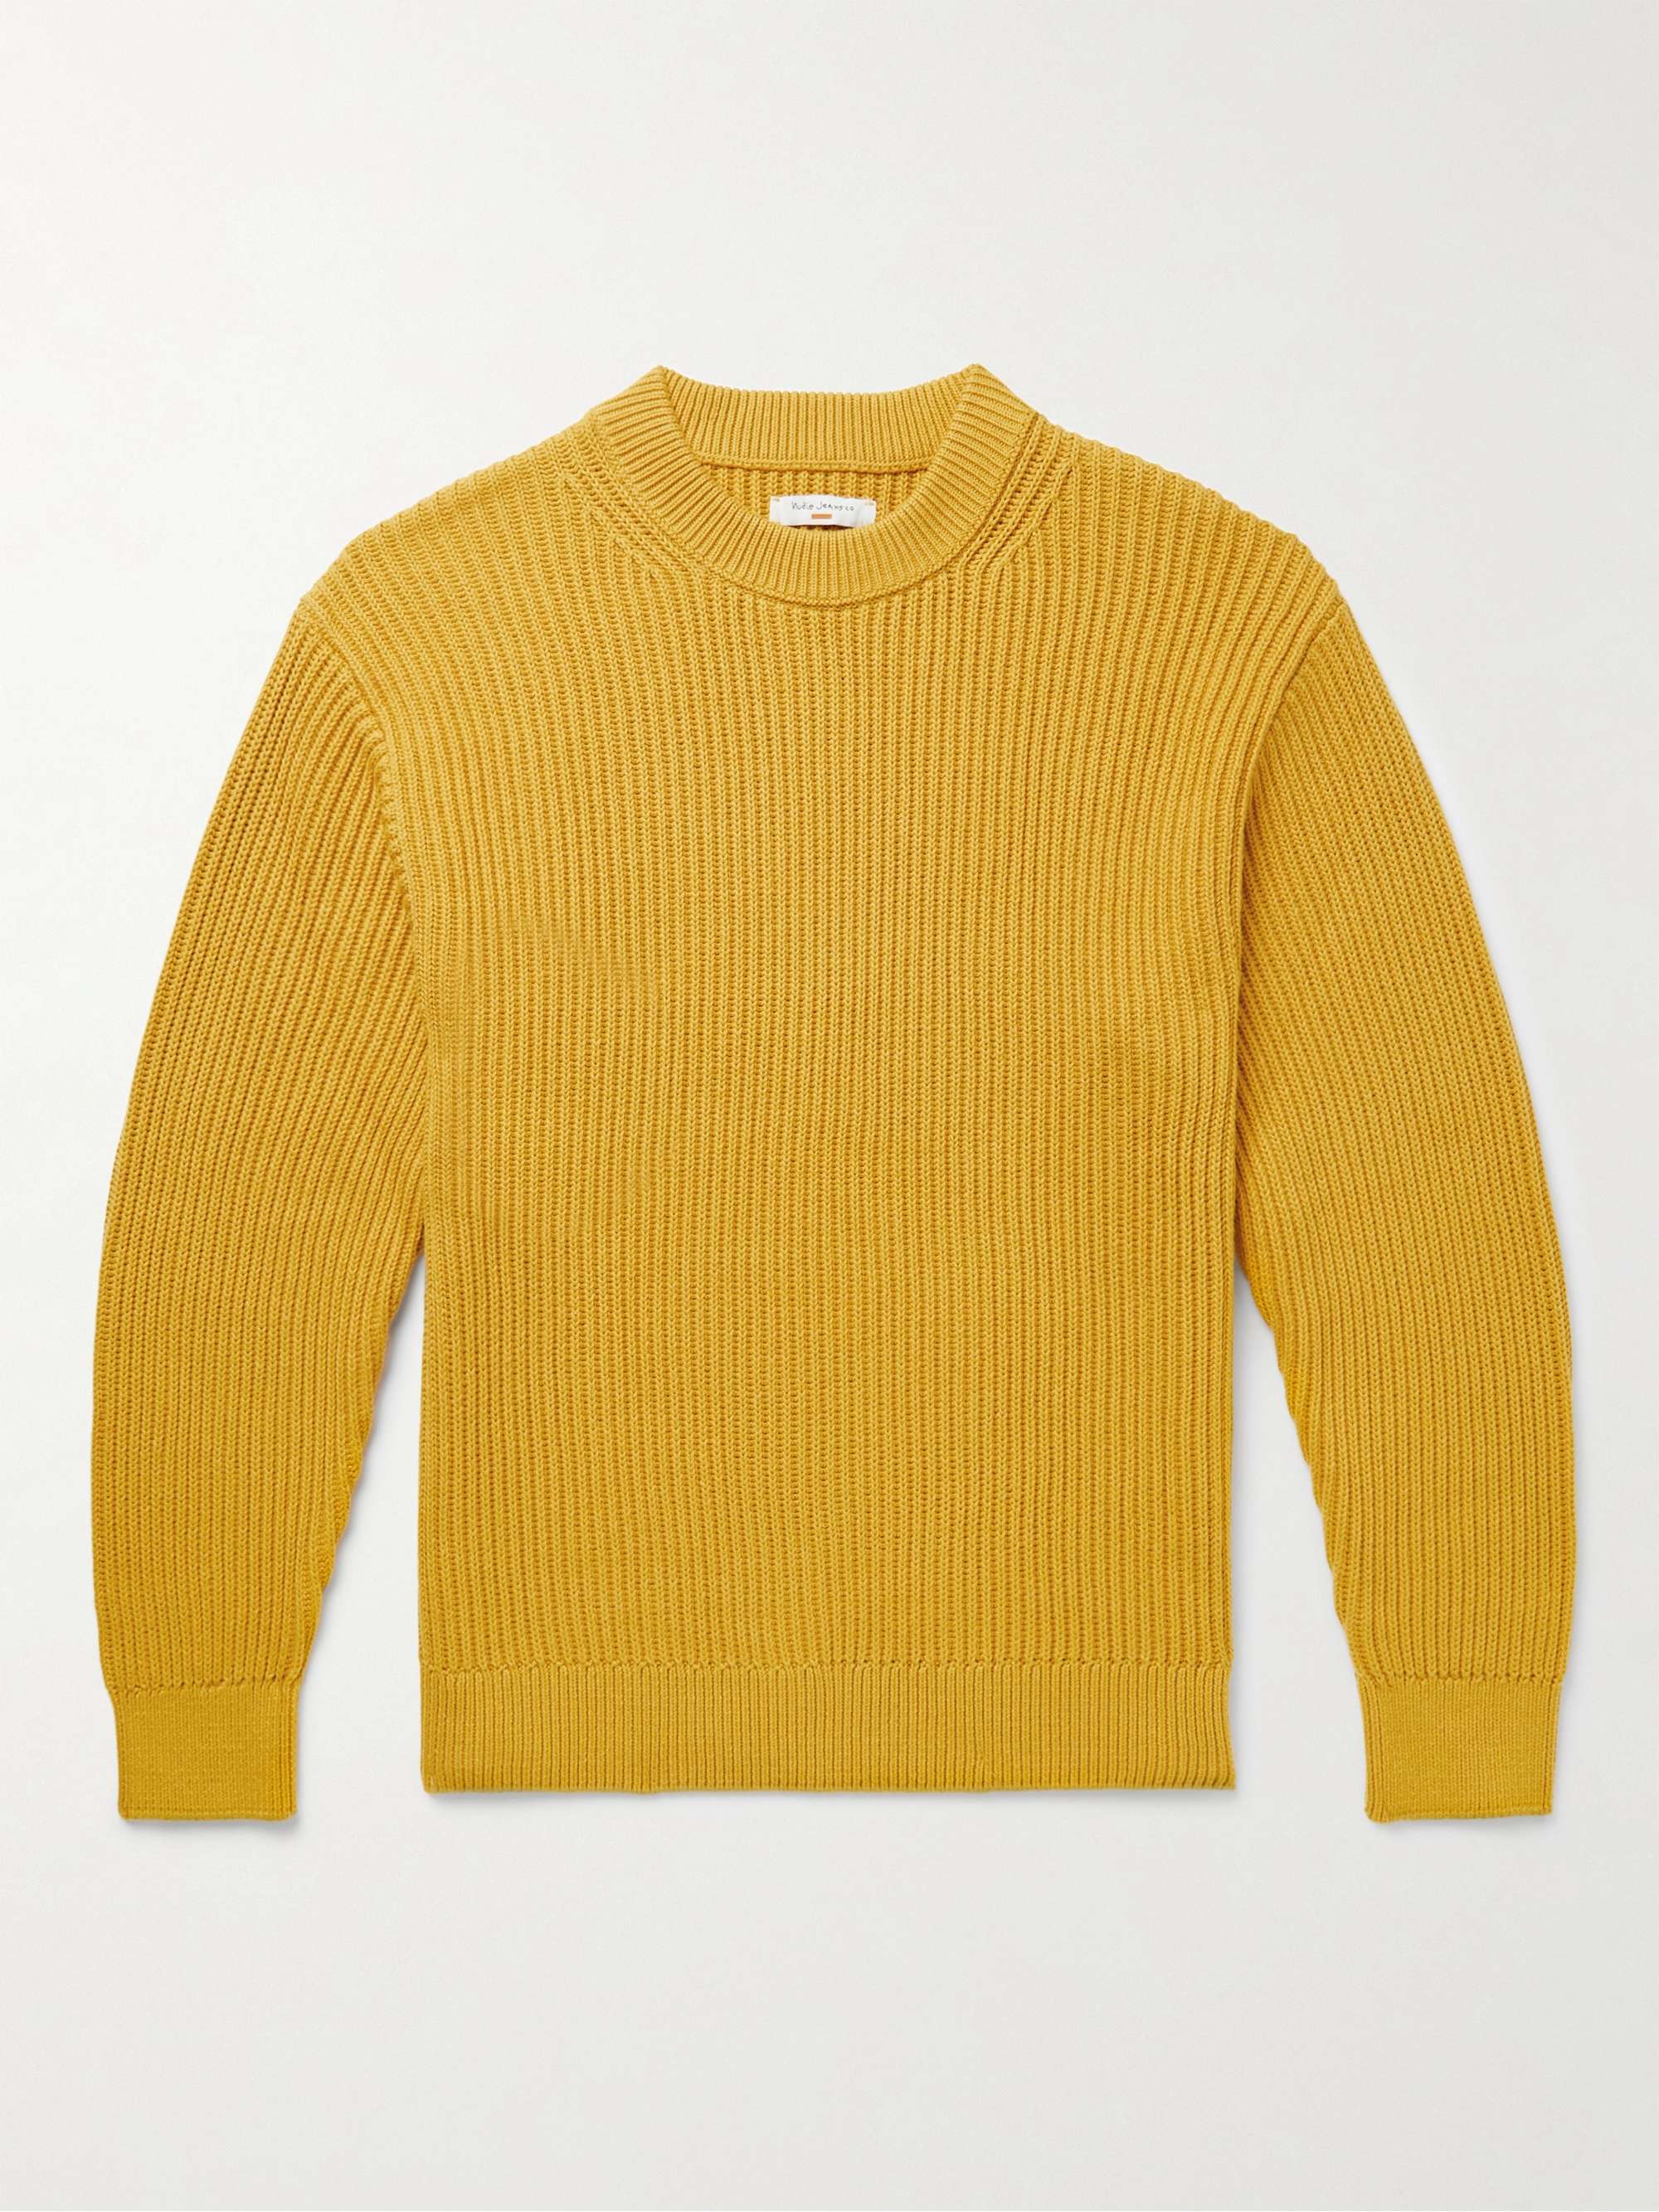 NUDIE JEANS Frank Ribbed Cotton Sweater | MR PORTER